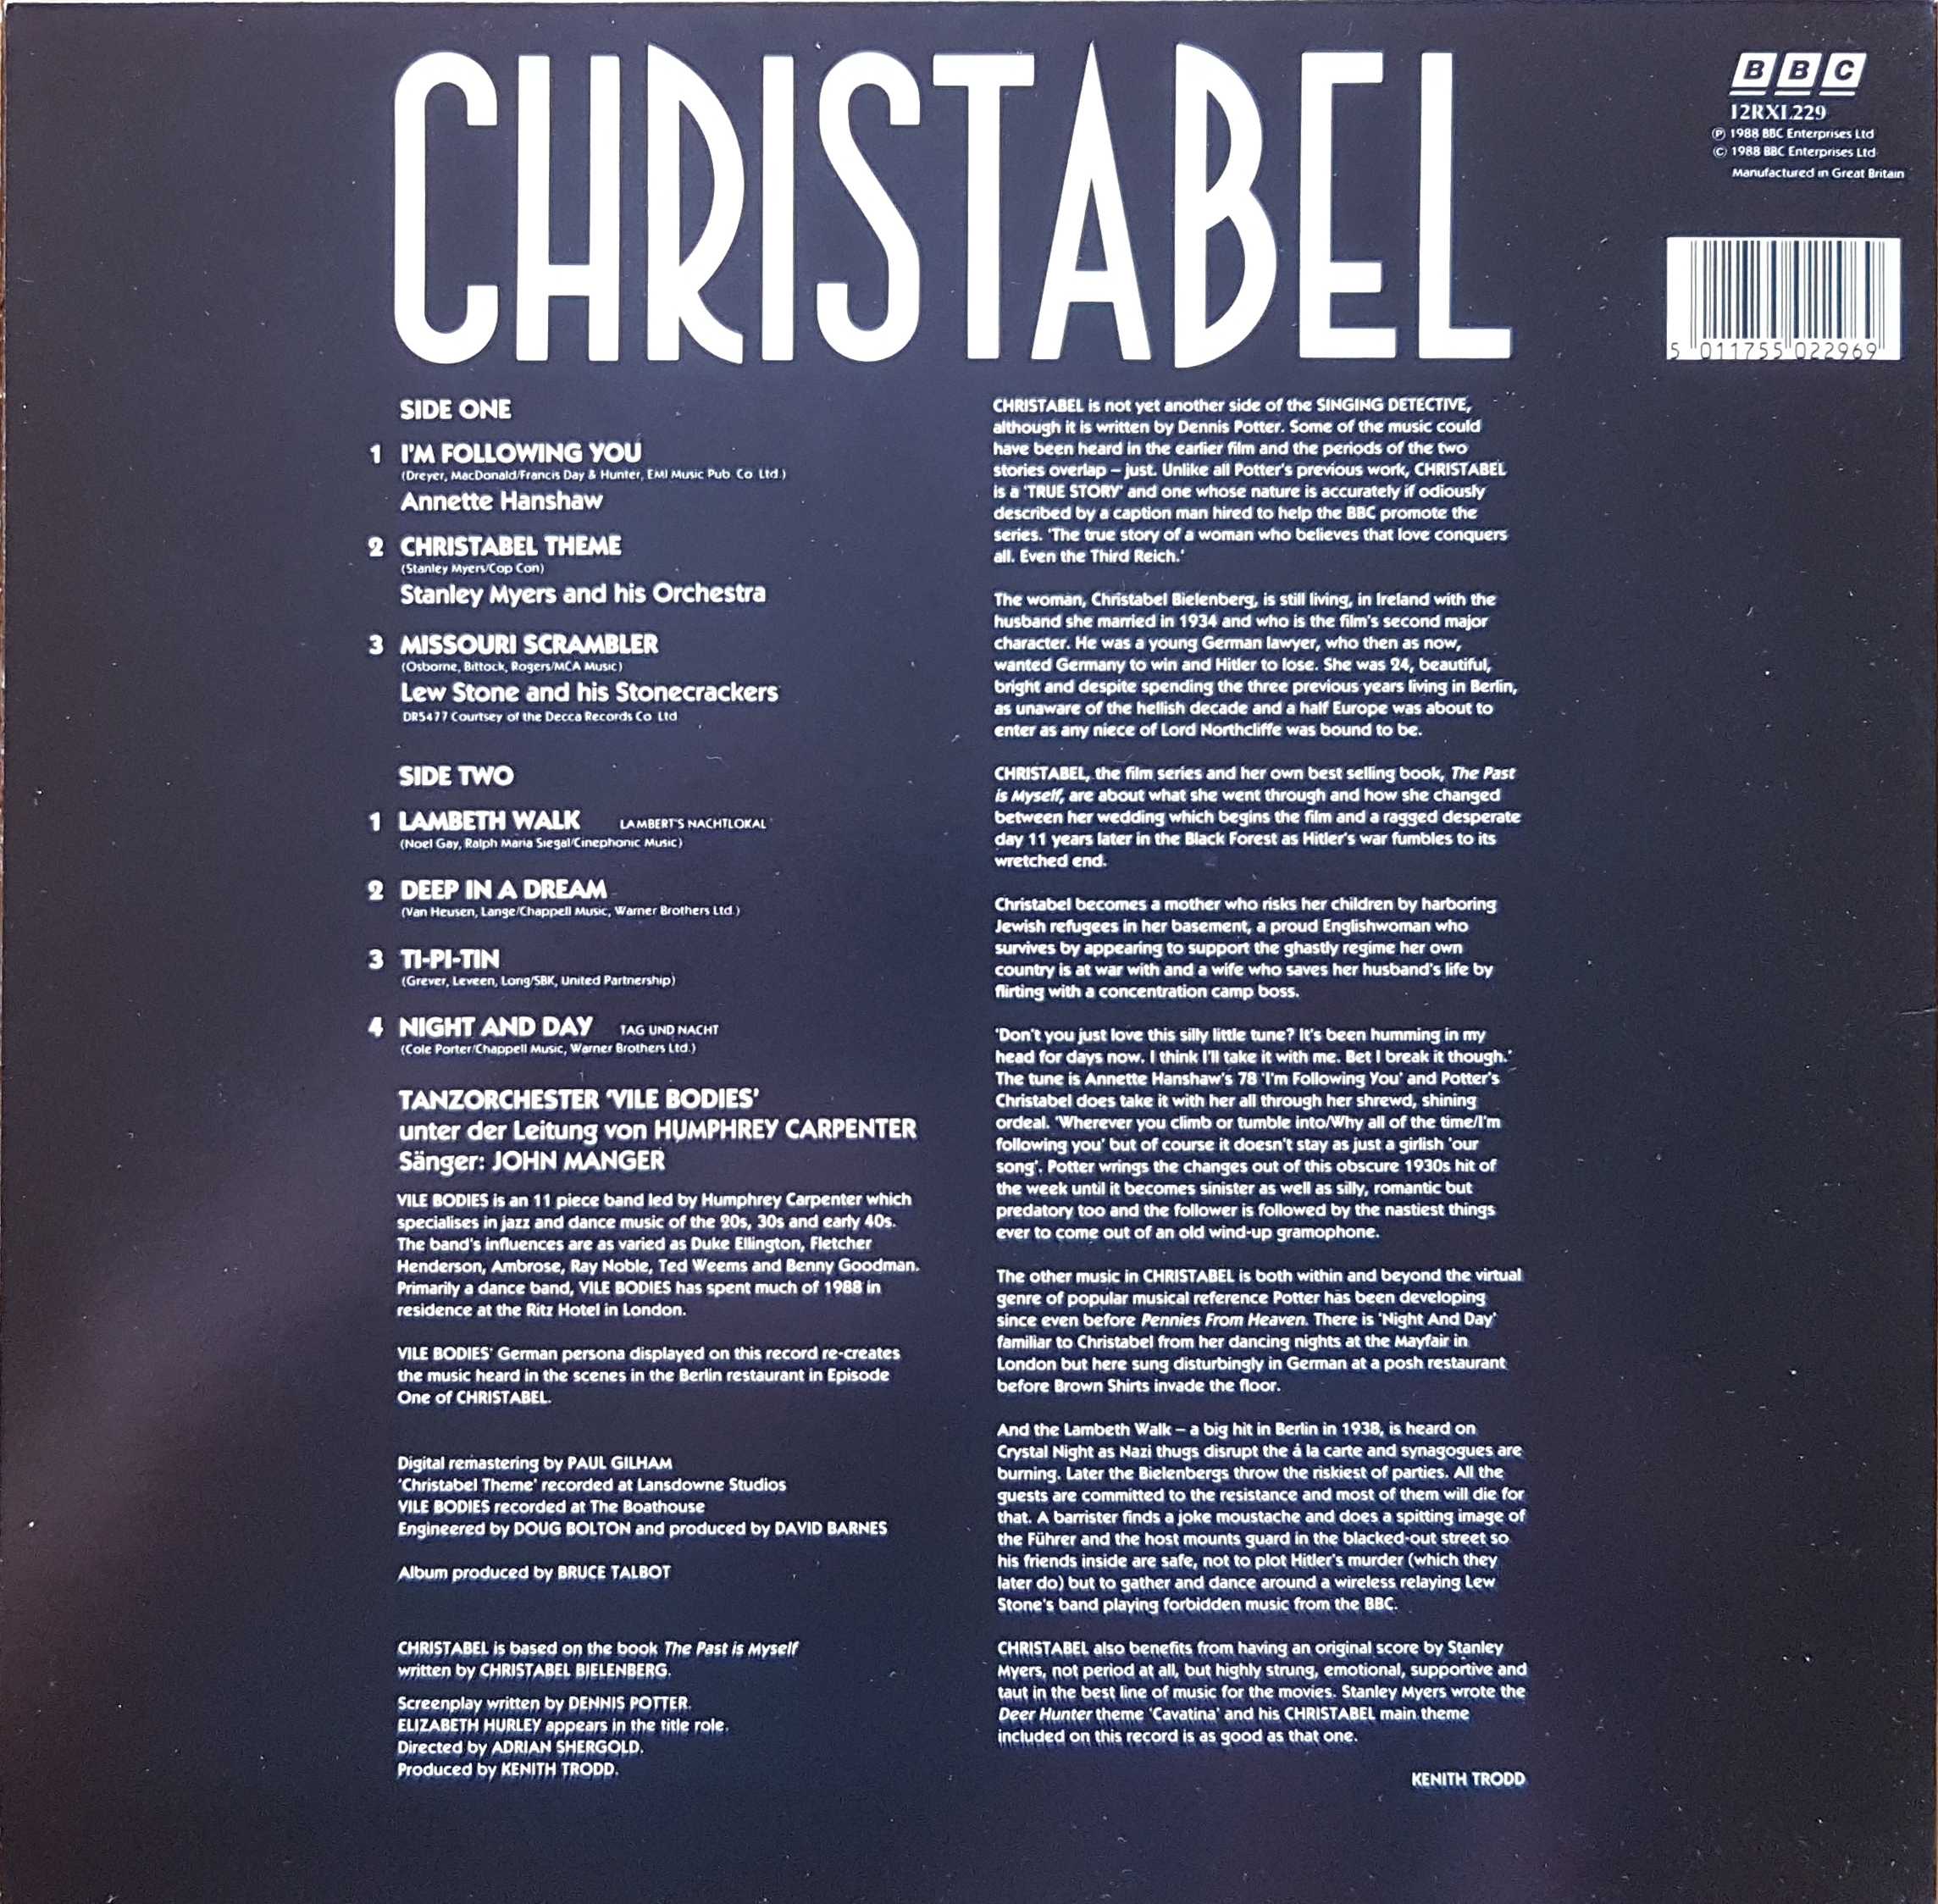 Picture of 12 RXL 229 Christabel by artist Myers / Gay / Lange from the BBC records and Tapes library